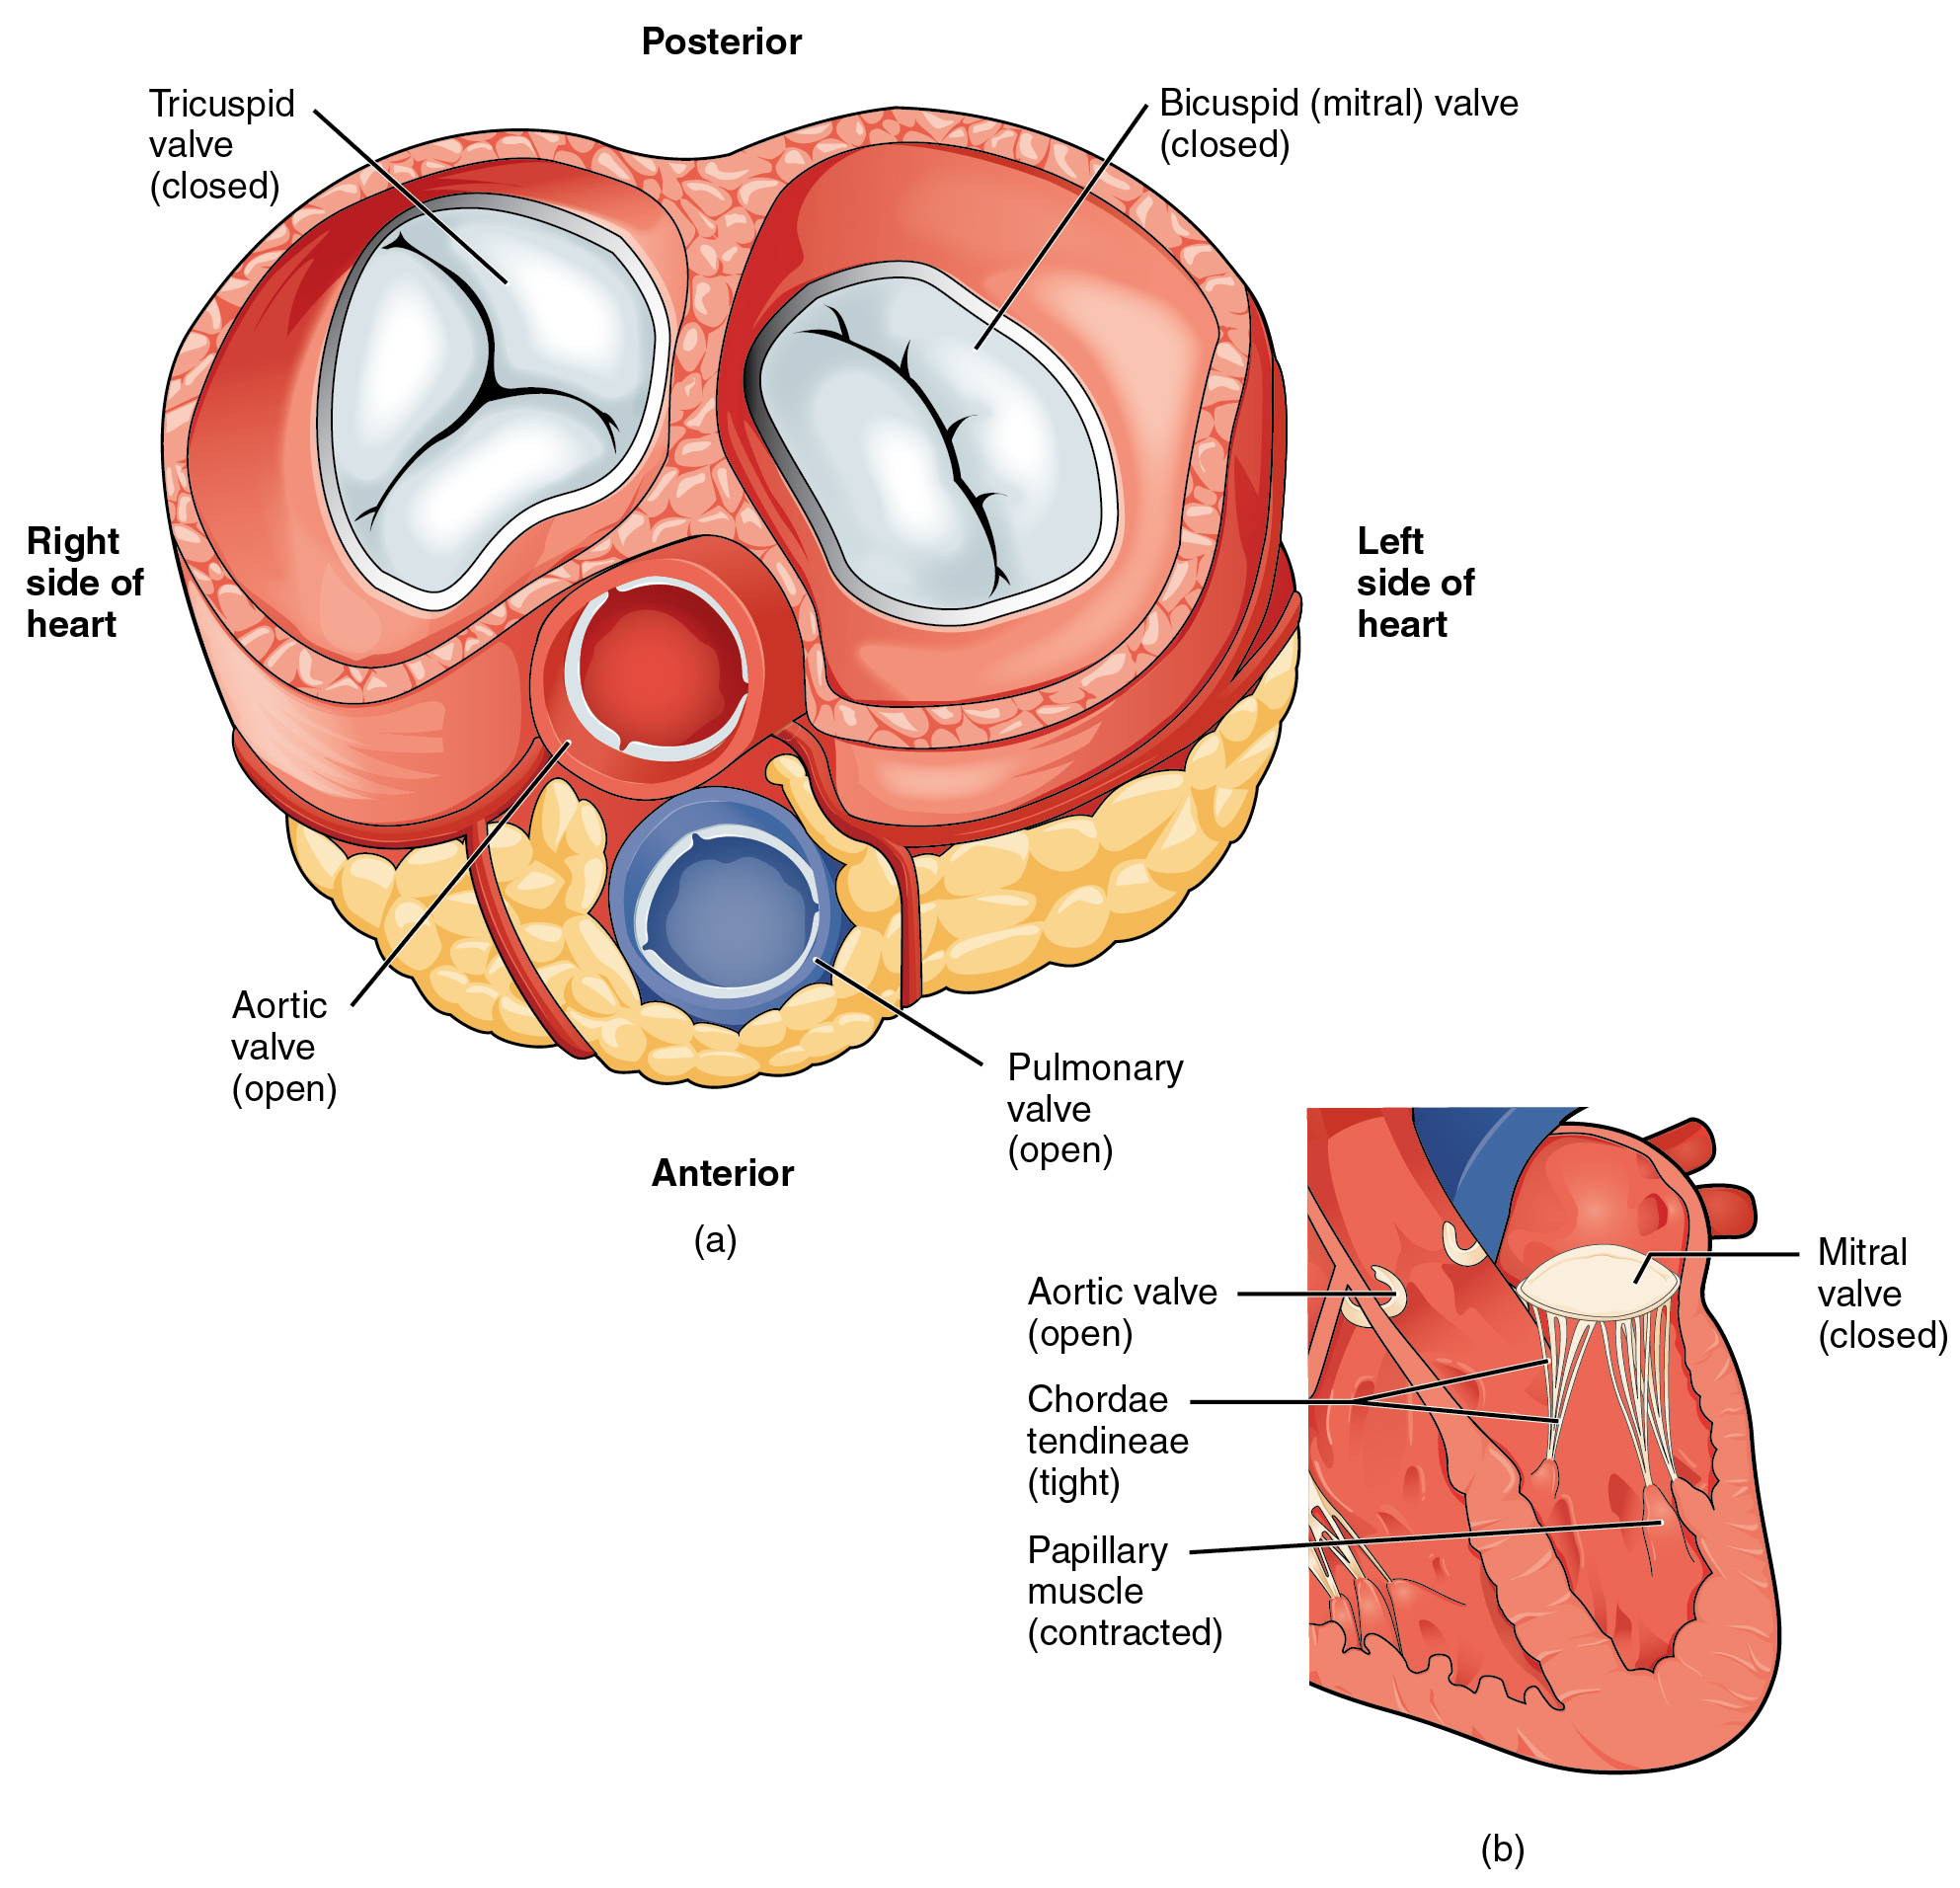 Labeled diagrams of transverse and frontal sections of the heart showing that when the ventricles contract the atrioventricular valves are closed and the semilunar valves are open.  